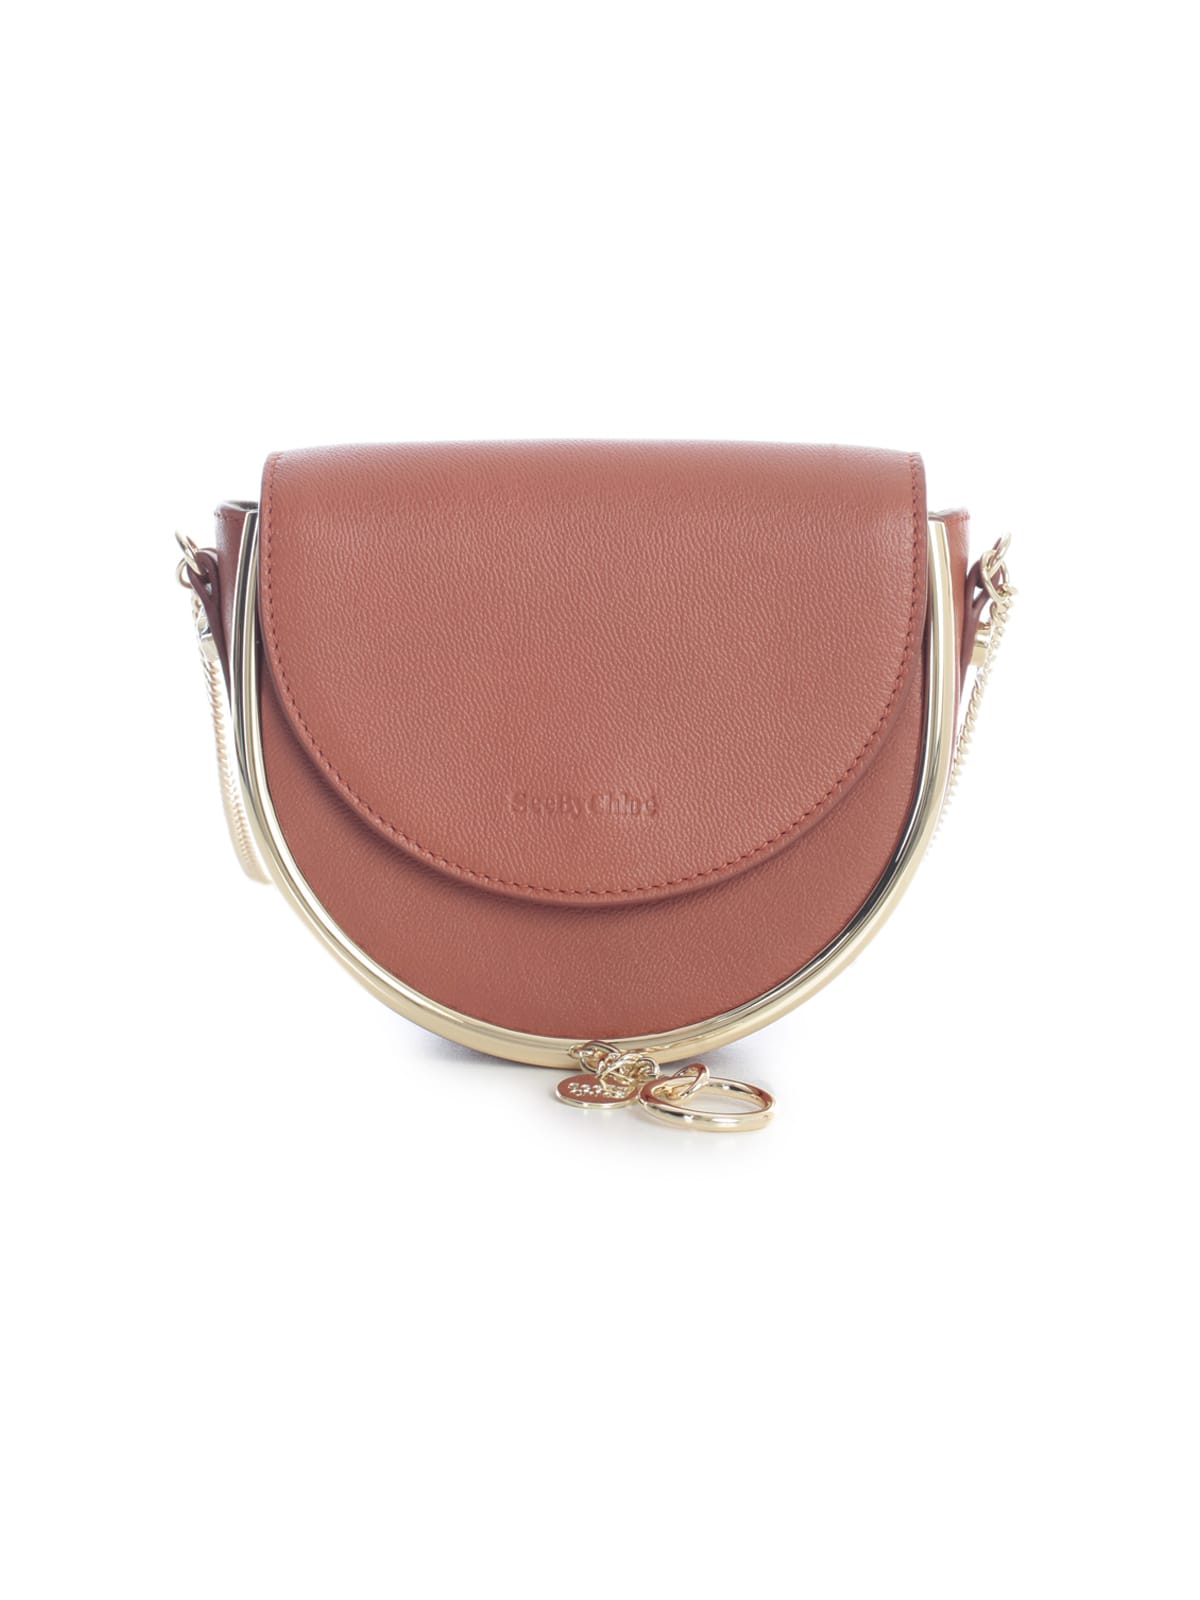 SEE BY CHLOÉ CLUTCHES EVENING BAG W/FLAP AND CROSSBODY,11306400